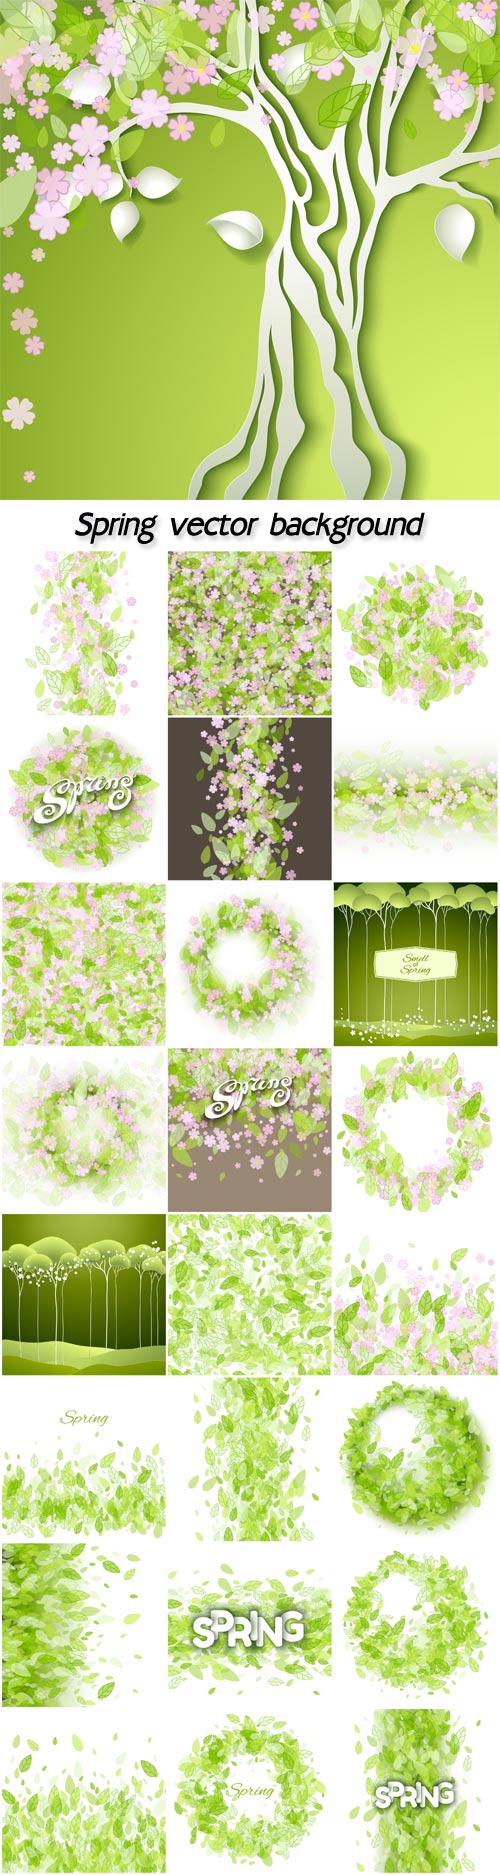 Spring vector background with green leaves and flowers